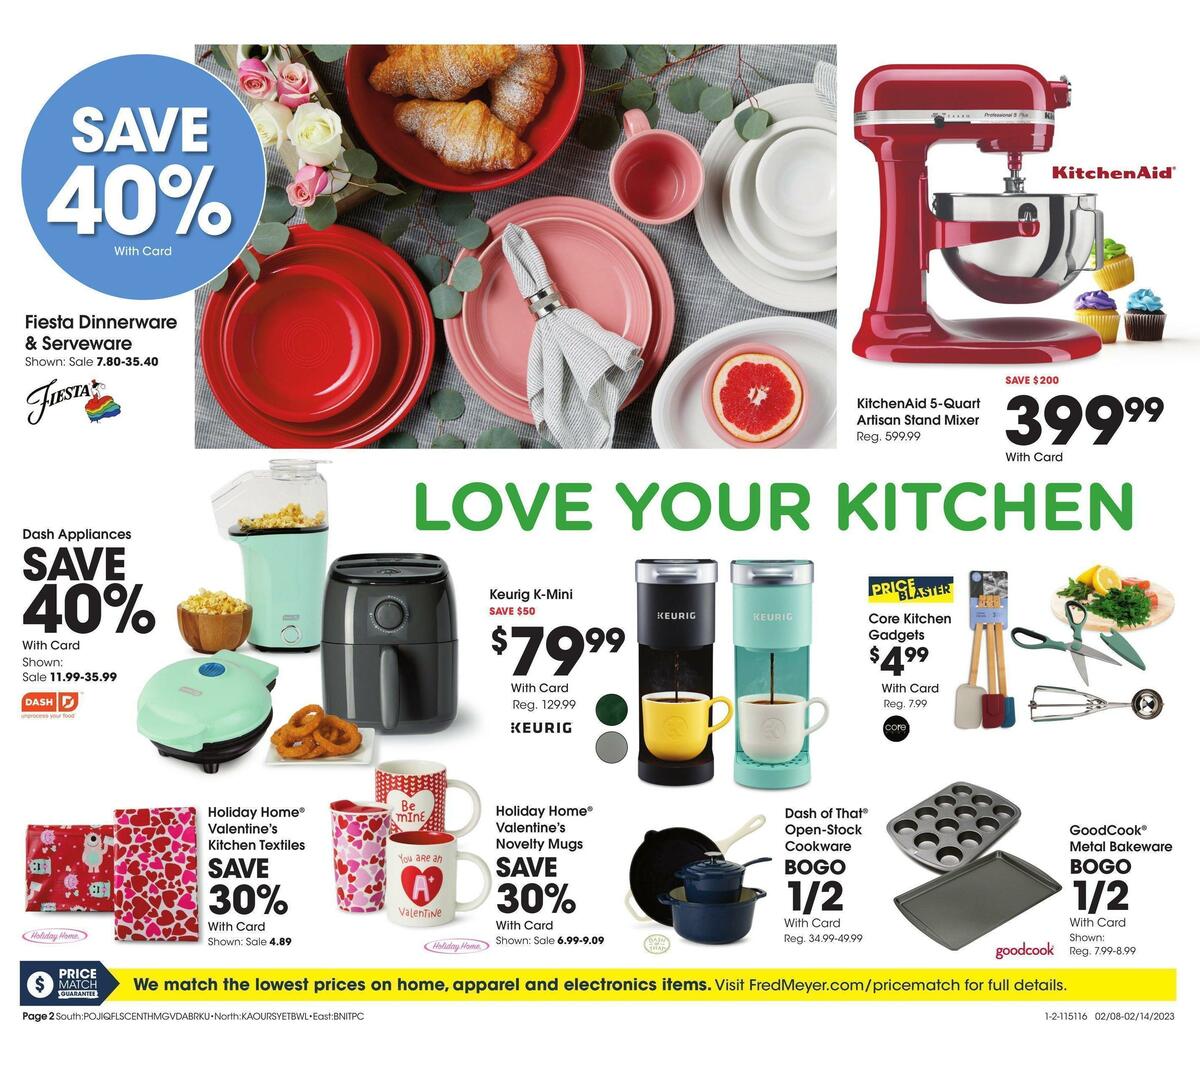 Fred Meyer General Merchandise Weekly Ad from February 8